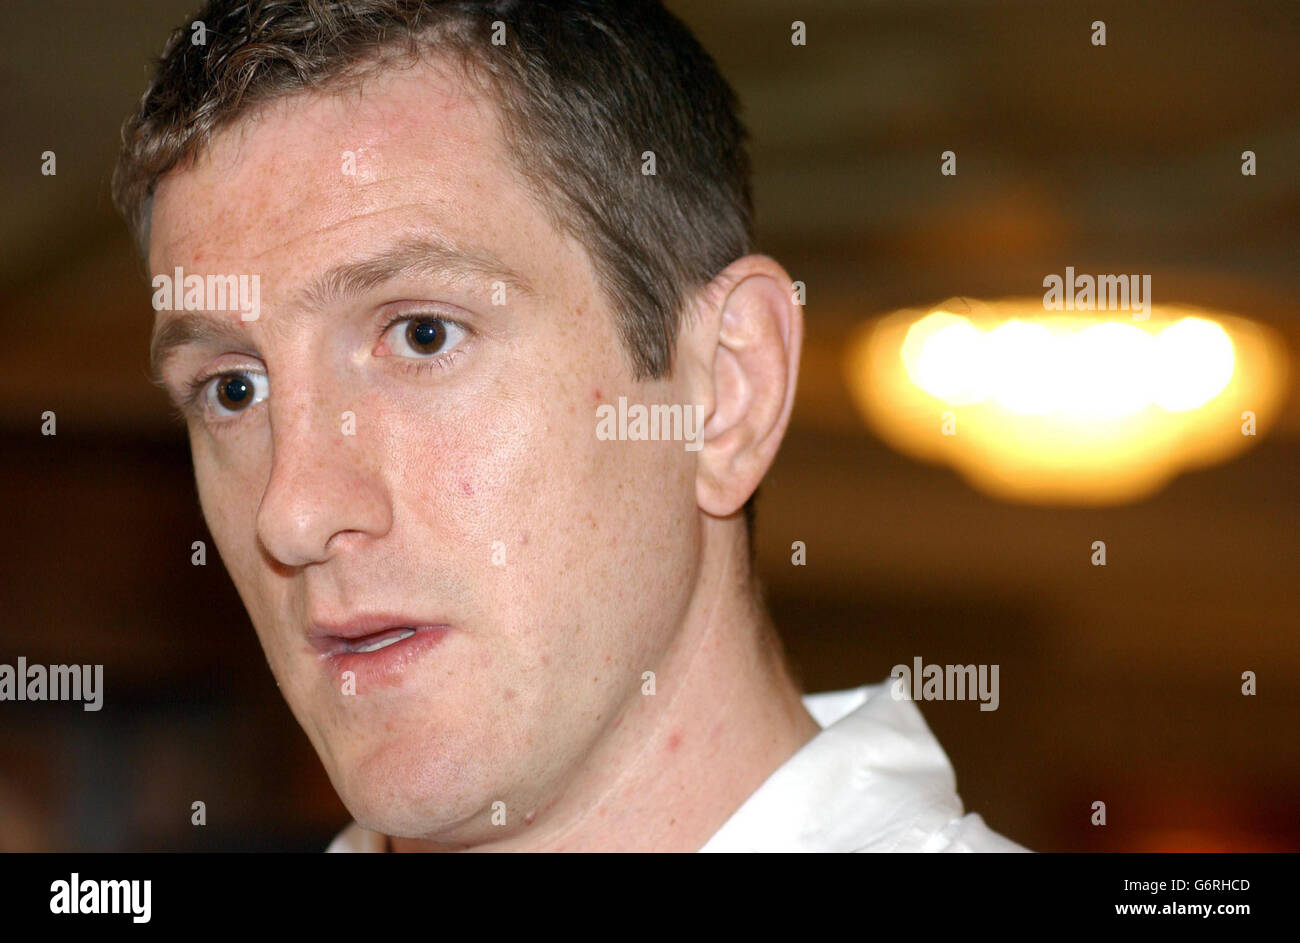 England Rugby Player Will Greenwood prepares for the opening game in the 2004 Six Nations Championship against Italy at Pennyhill Park Hotel, Surrey. Stock Photo